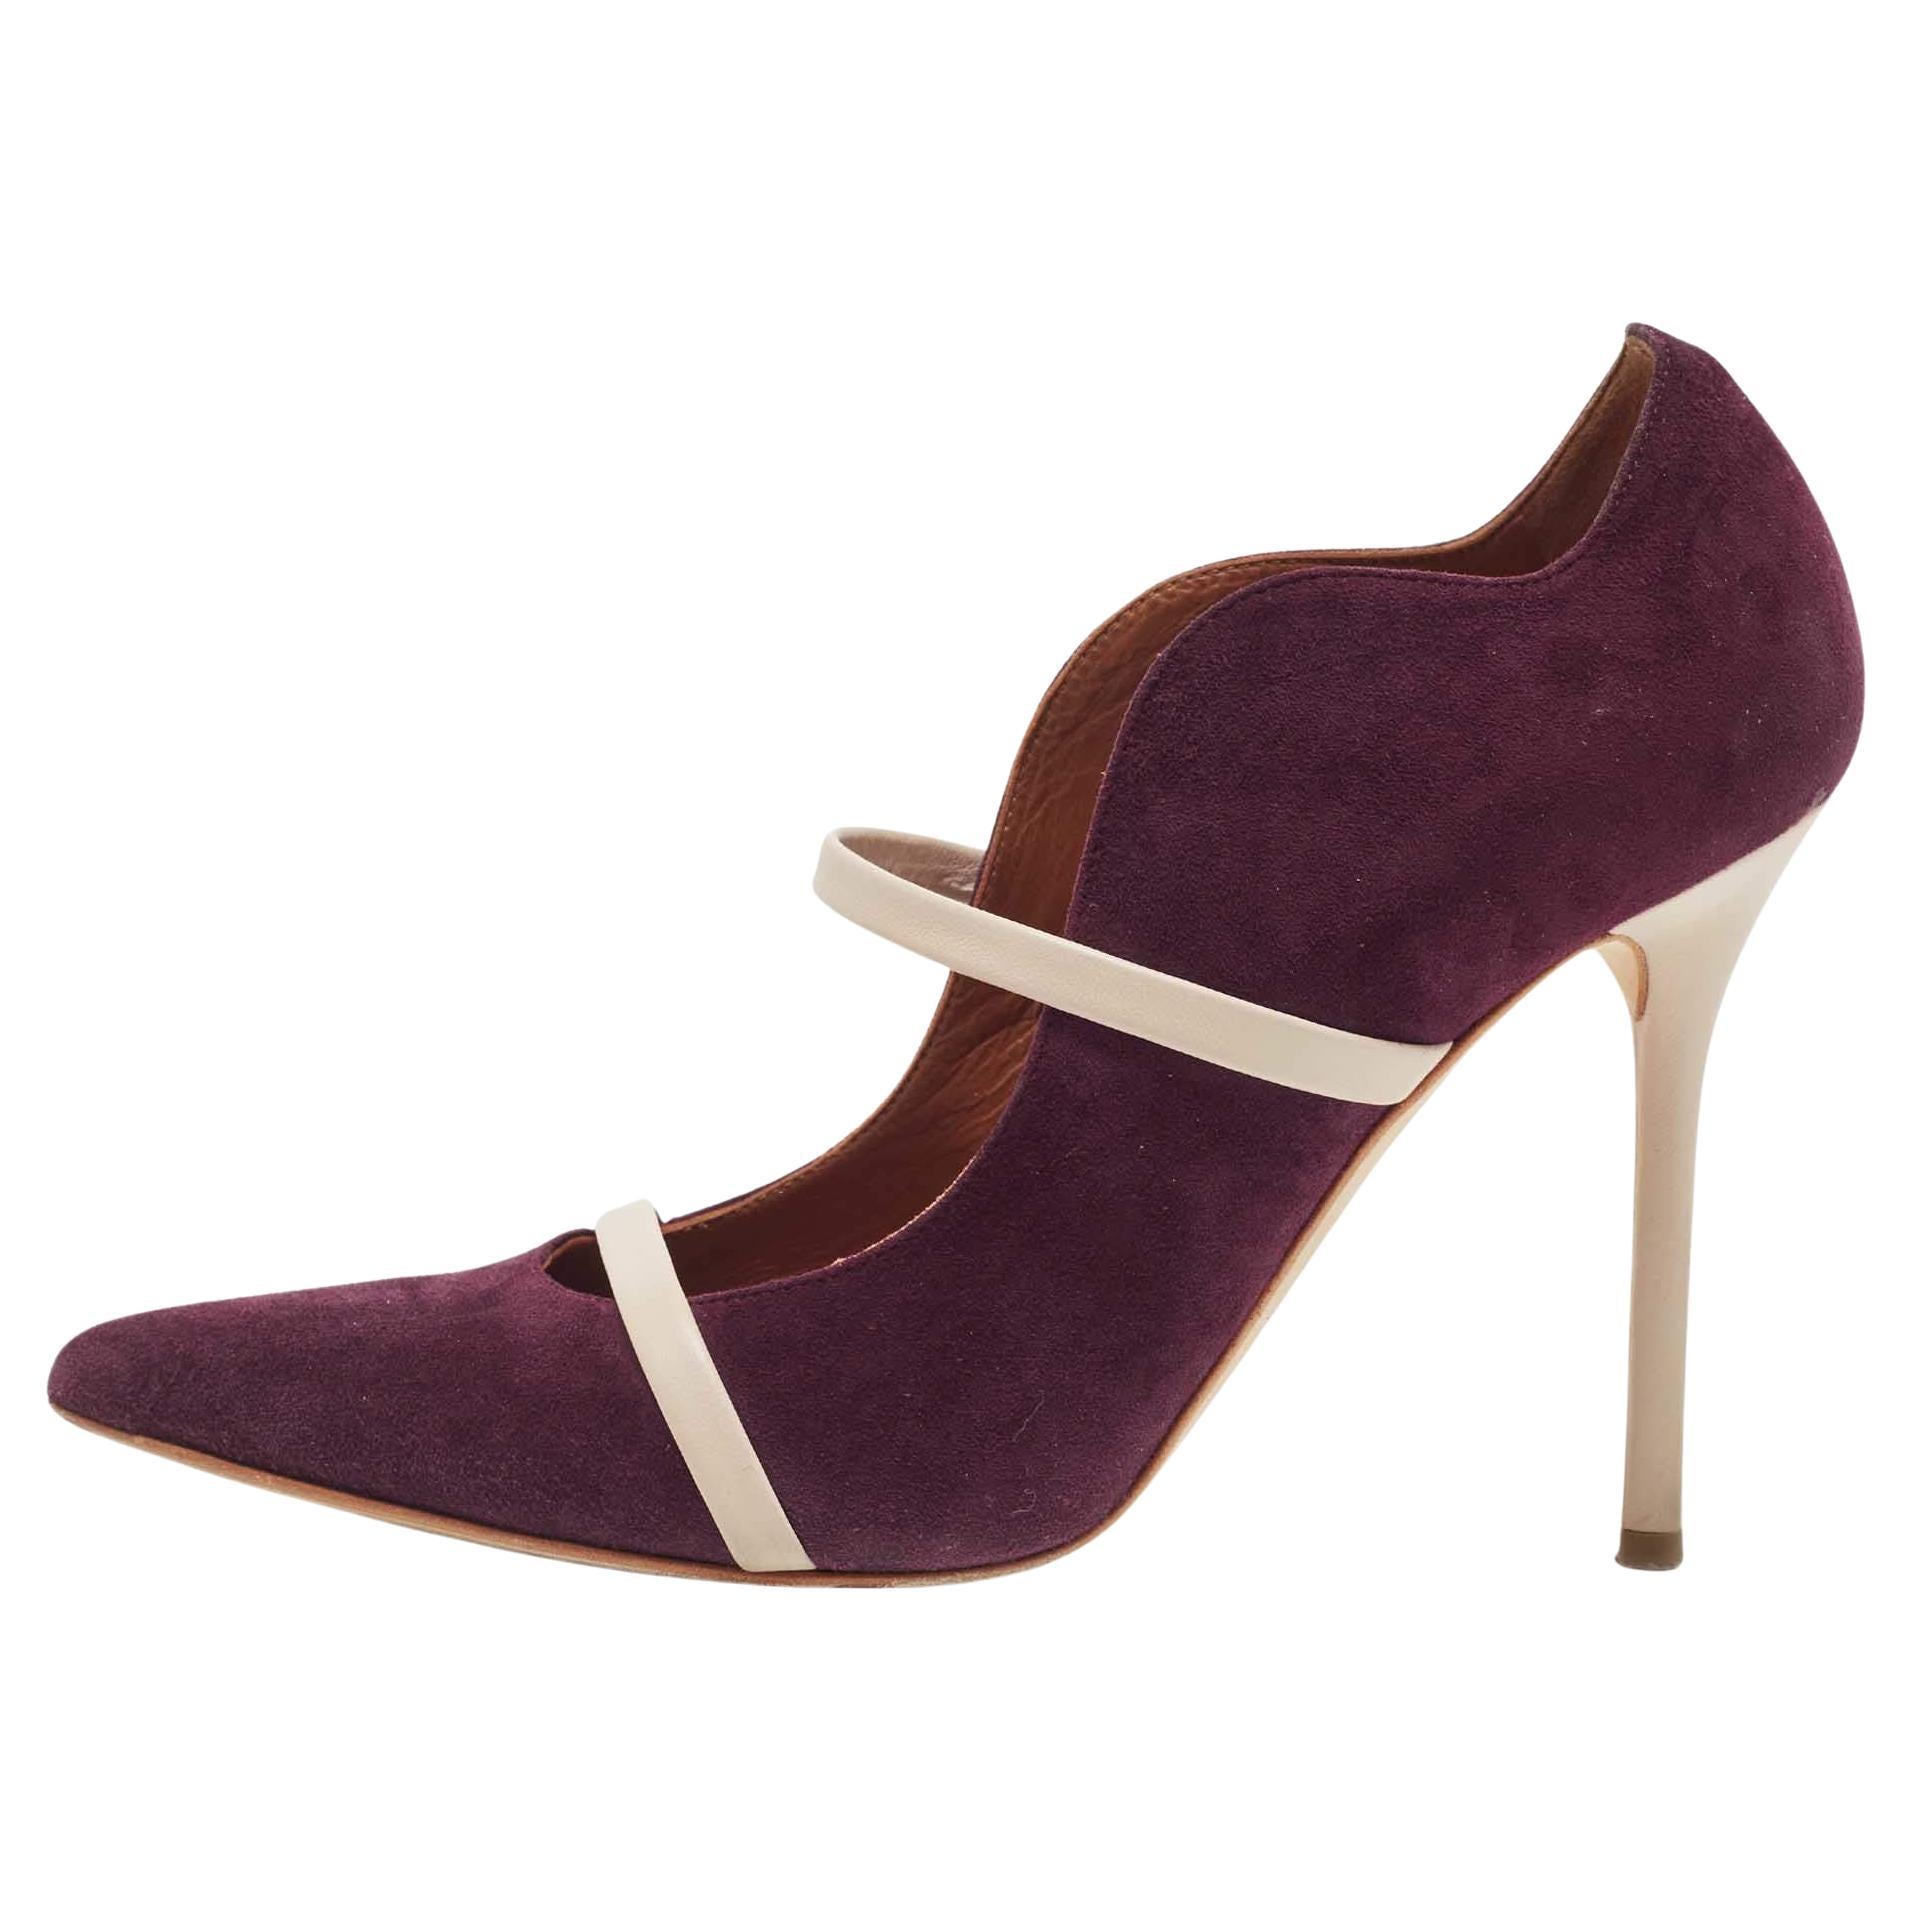 Malone Souliers Burgundy/Beige Suede and Leather Maureen Pumps Size 38 For Sale